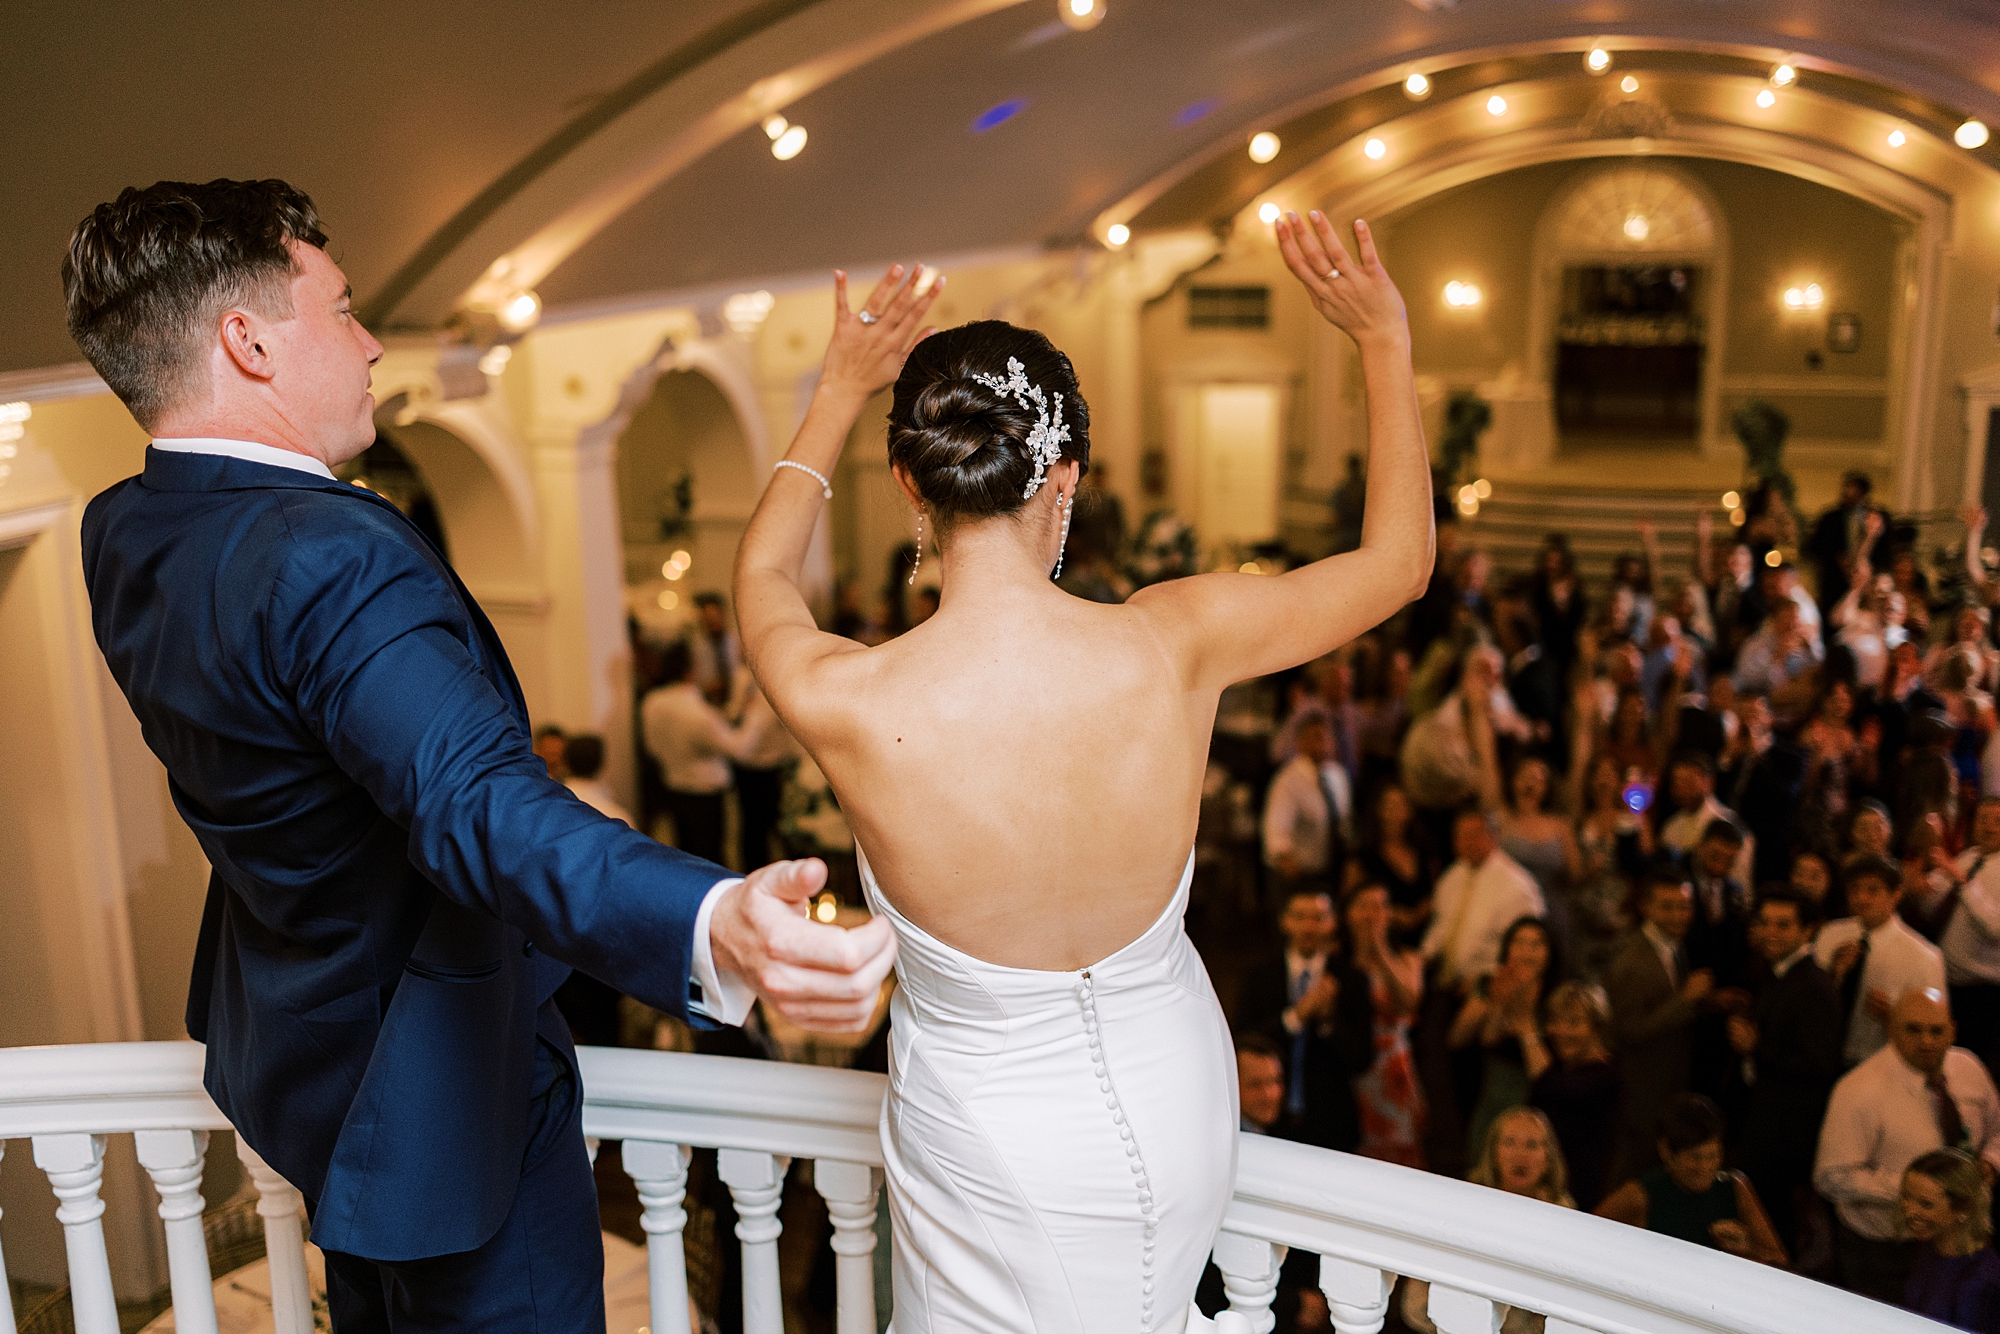 bride waves at guests from balcony with groom in club